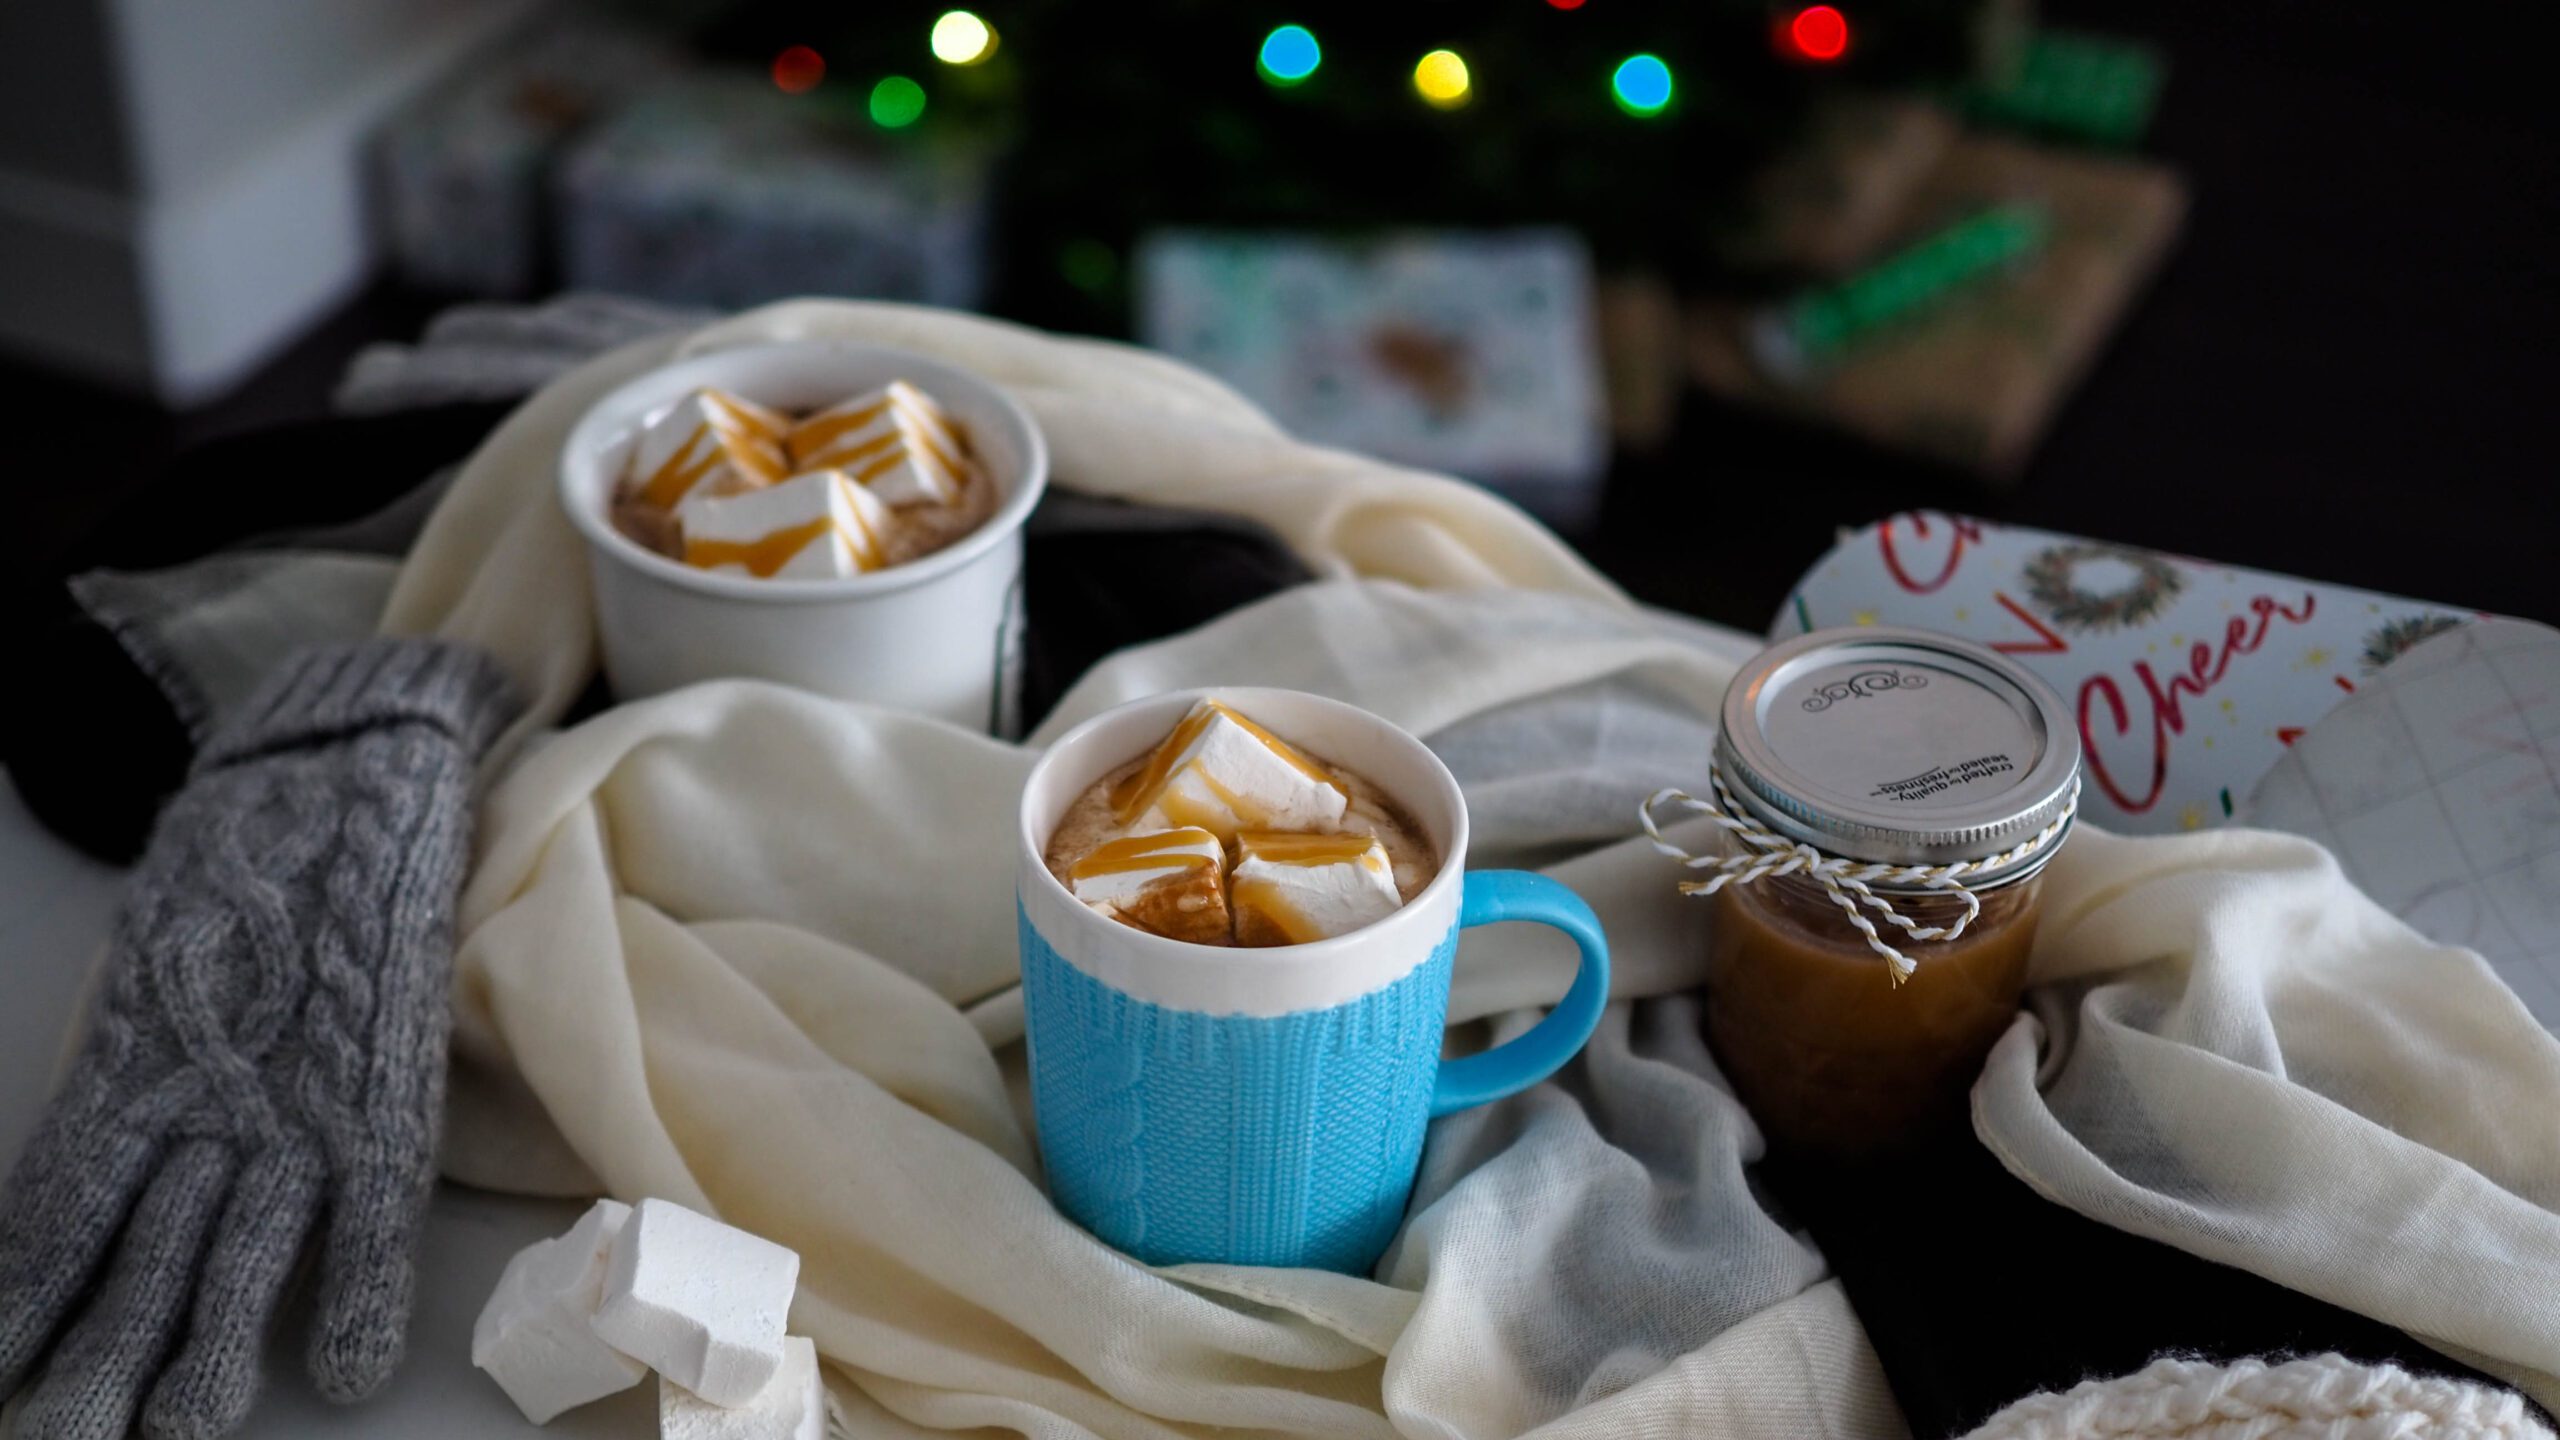 Two mugs of salted caramel hot chocolate on a busy kitchen counter filled with gloves, a scarf, and wrapping paper in front of a Christmas tree.